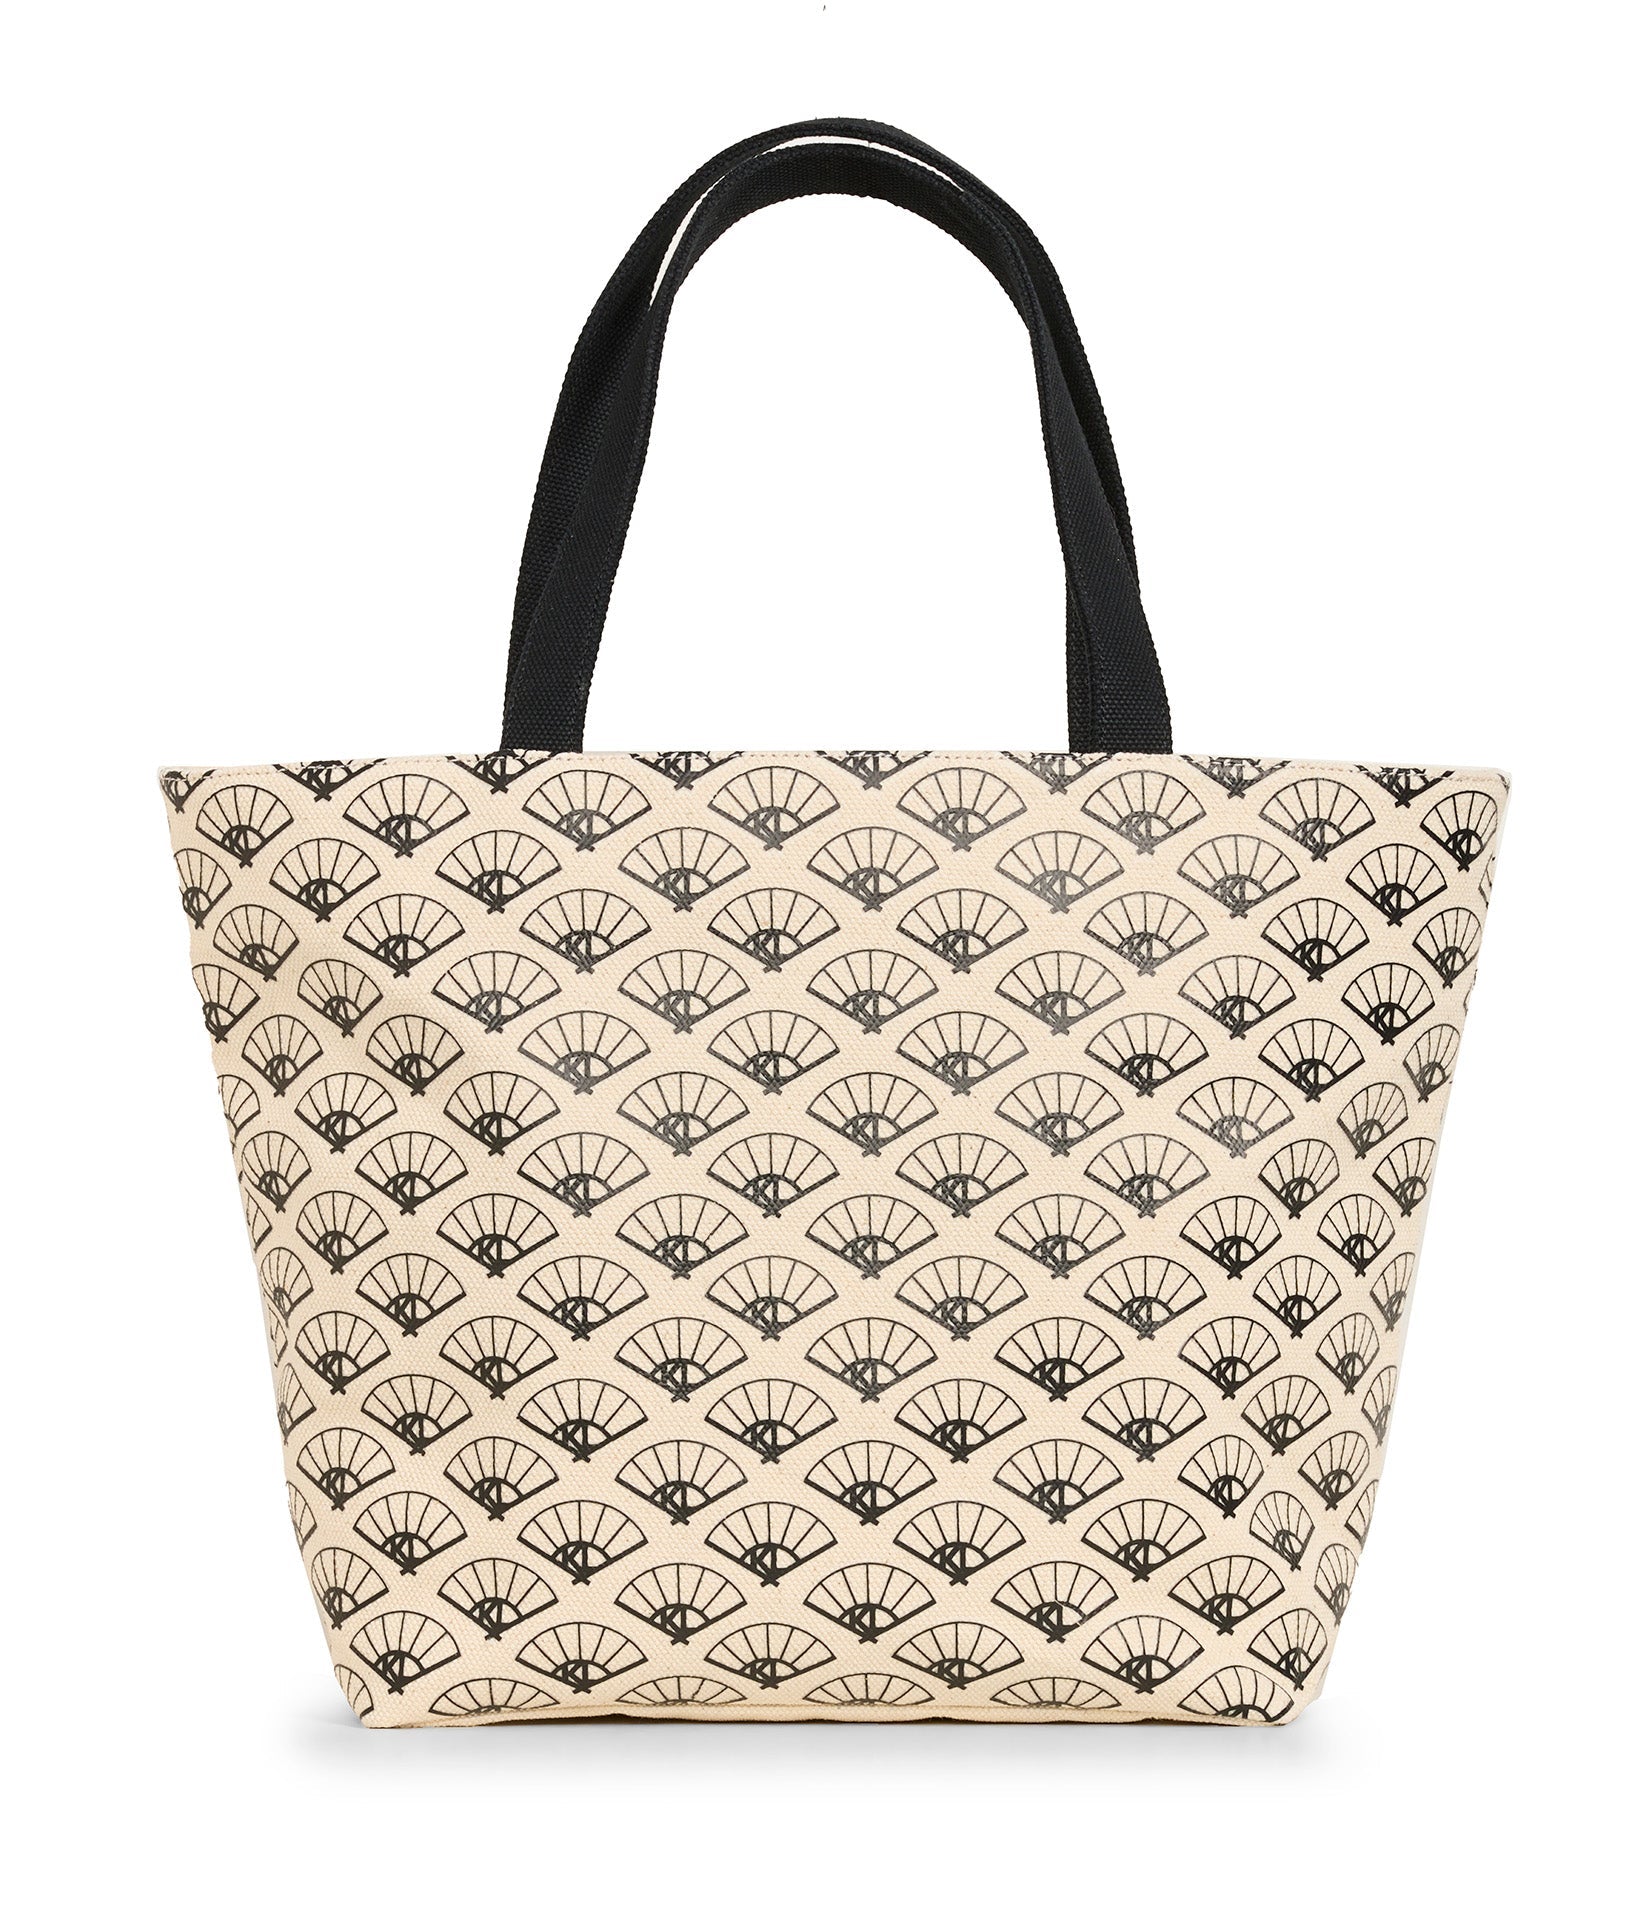 CANNES CANVAS TOTE